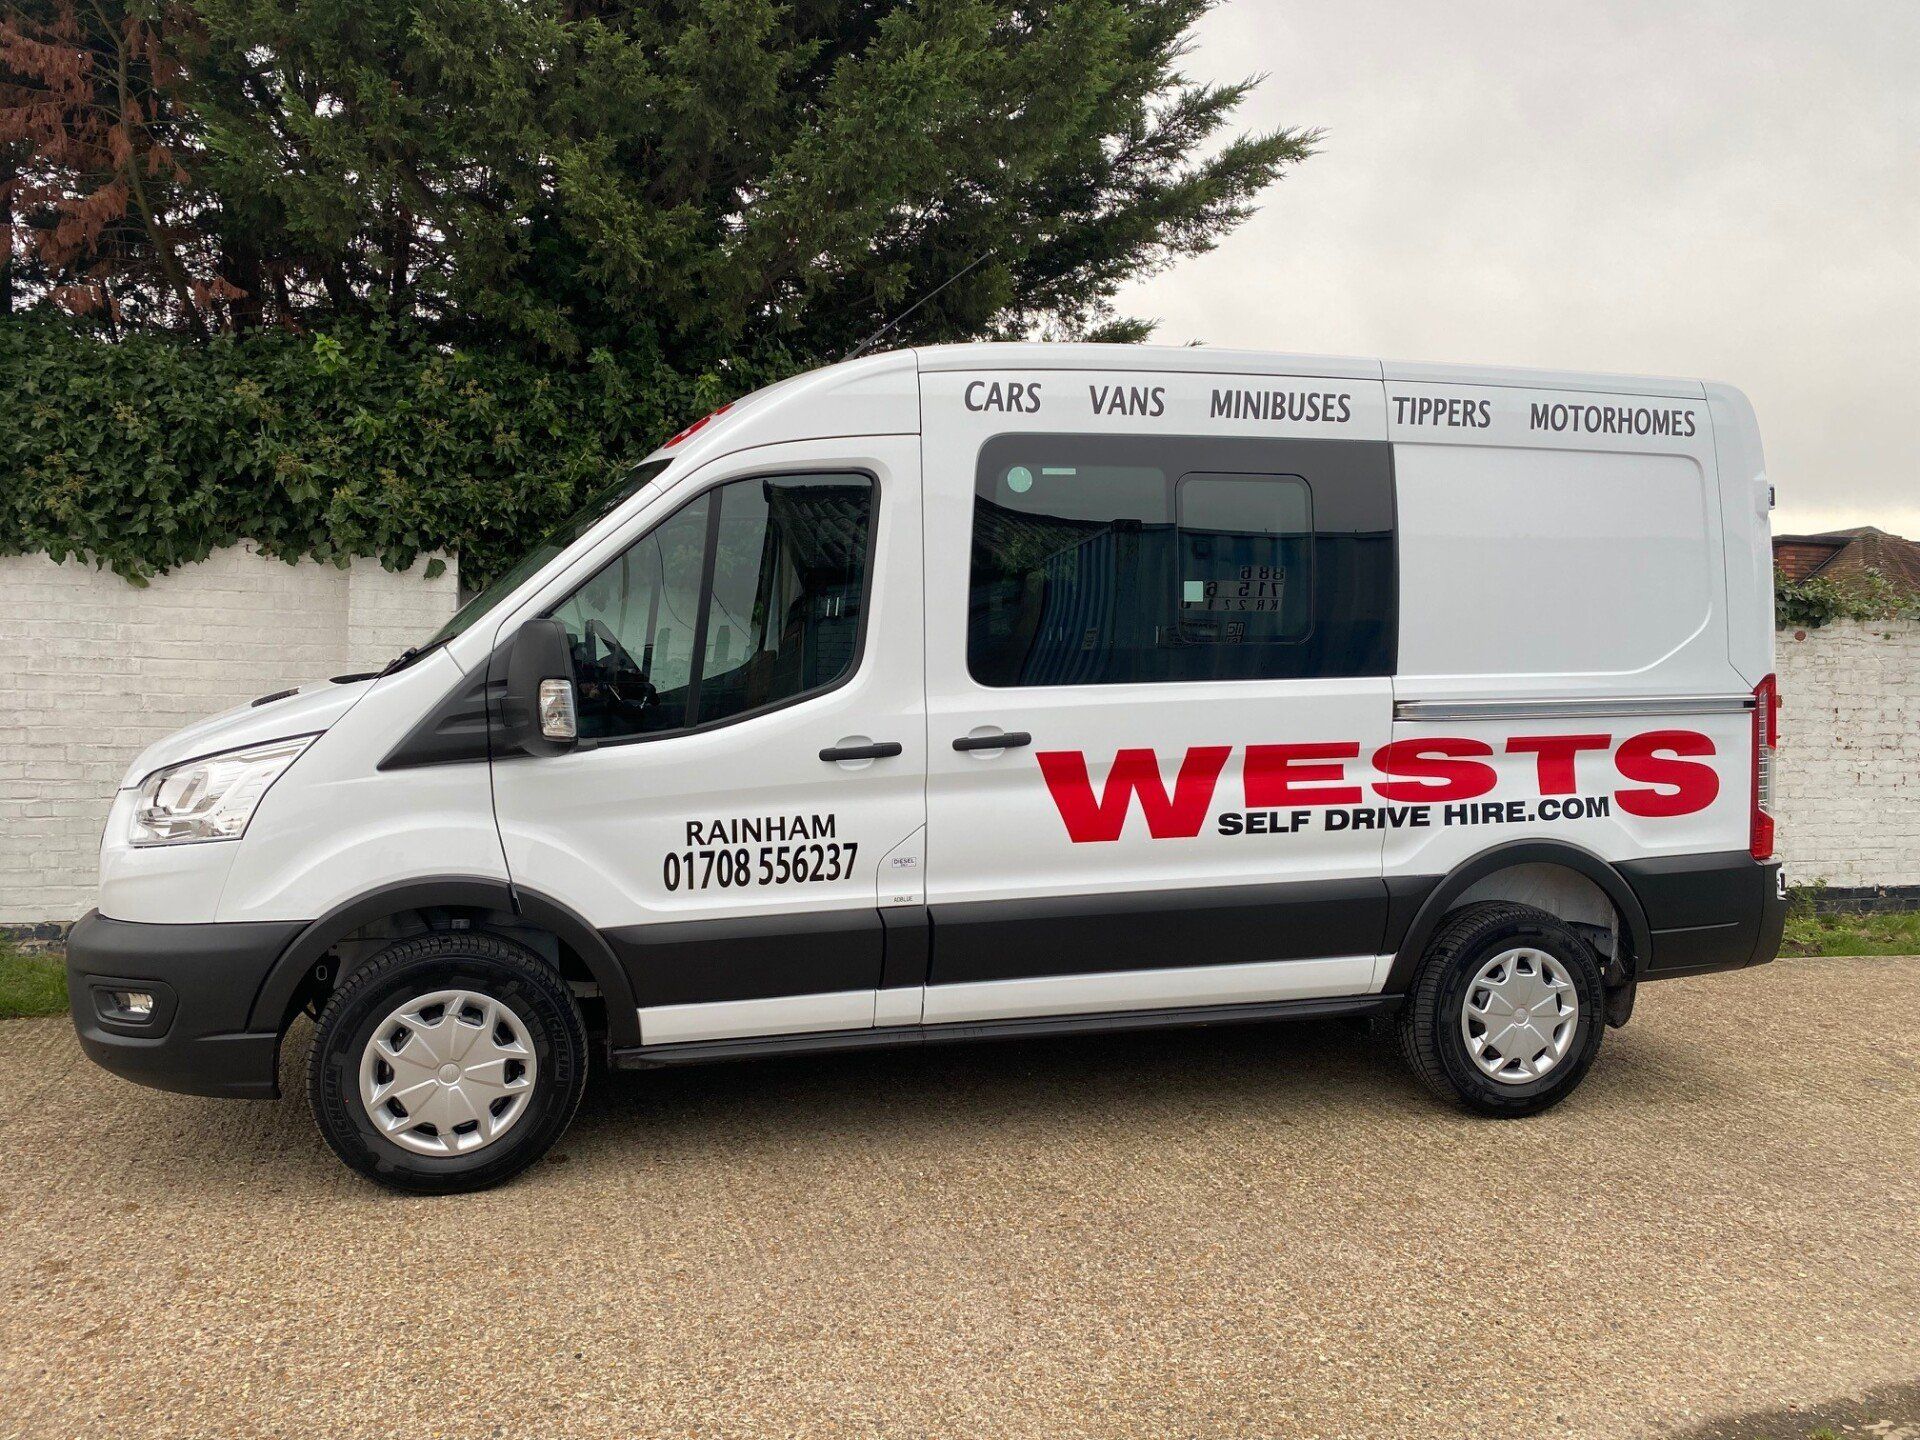 rent a crew cab van rental double cab van hire, with tow bar and roof beacon